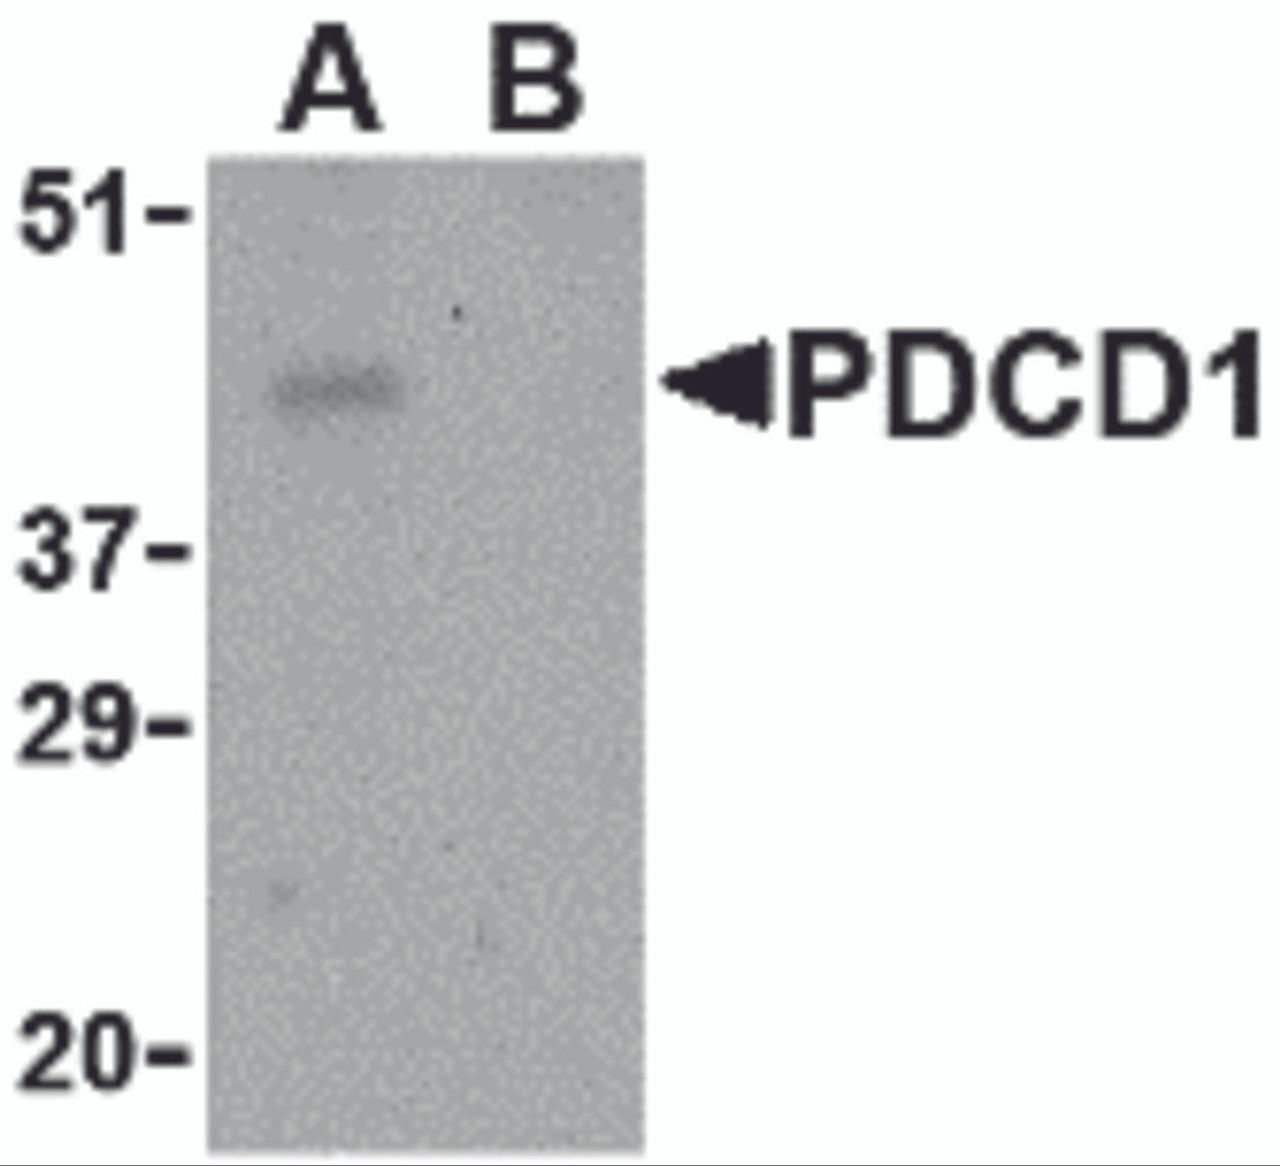 Western blot analysis of PD-1 in THP-1 cell lysate with PD-1 antibody at 1 &#956;g/mL in the (A) absence and (B) presence of blocking peptide.